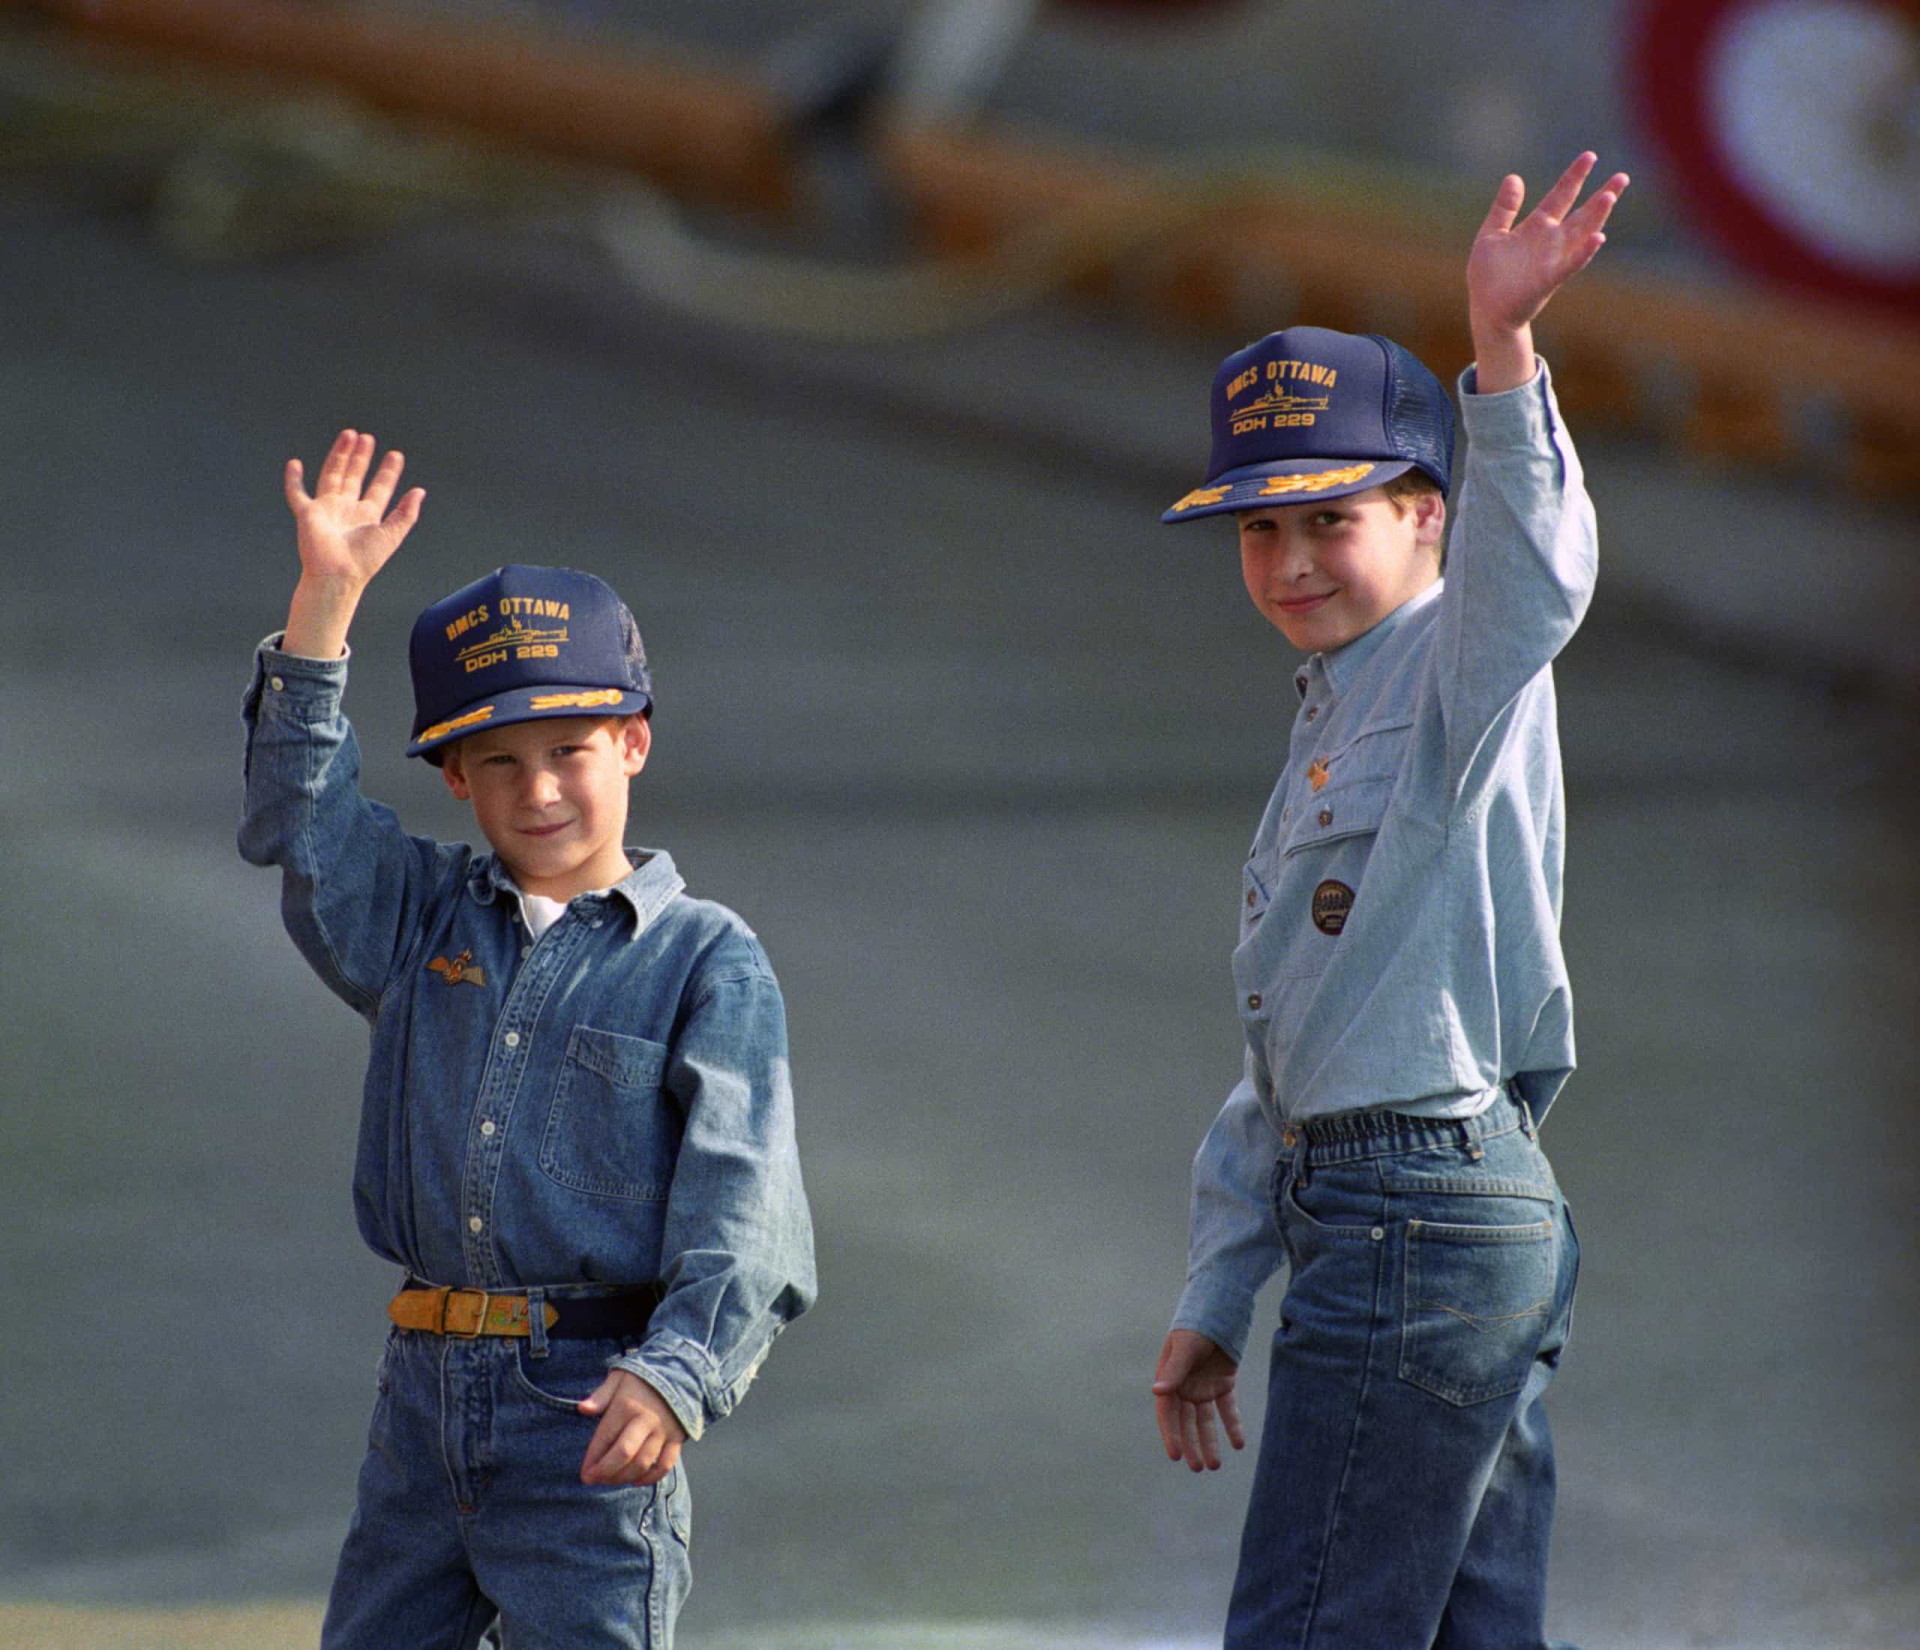 <p>Growing up fast, Prince William and Prince Harry wear baseball-style caps given to them by the crew of the Canadian frigate HMCS <em>Ottawa</em> after they toured the ship that was moored alongside <em>Britannia</em> on the Toronto waterfront. Charles and Diana were in Canada in late October 1991 as part of a royal tour.</p><p><a href="https://www.msn.com/en-us/community/channel/vid-7xx8mnucu55yw63we9va2gwr7uihbxwc68fxqp25x6tg4ftibpra?cvid=94631541bc0f4f89bfd59158d696ad7e">Follow us and access great exclusive content every day</a></p>